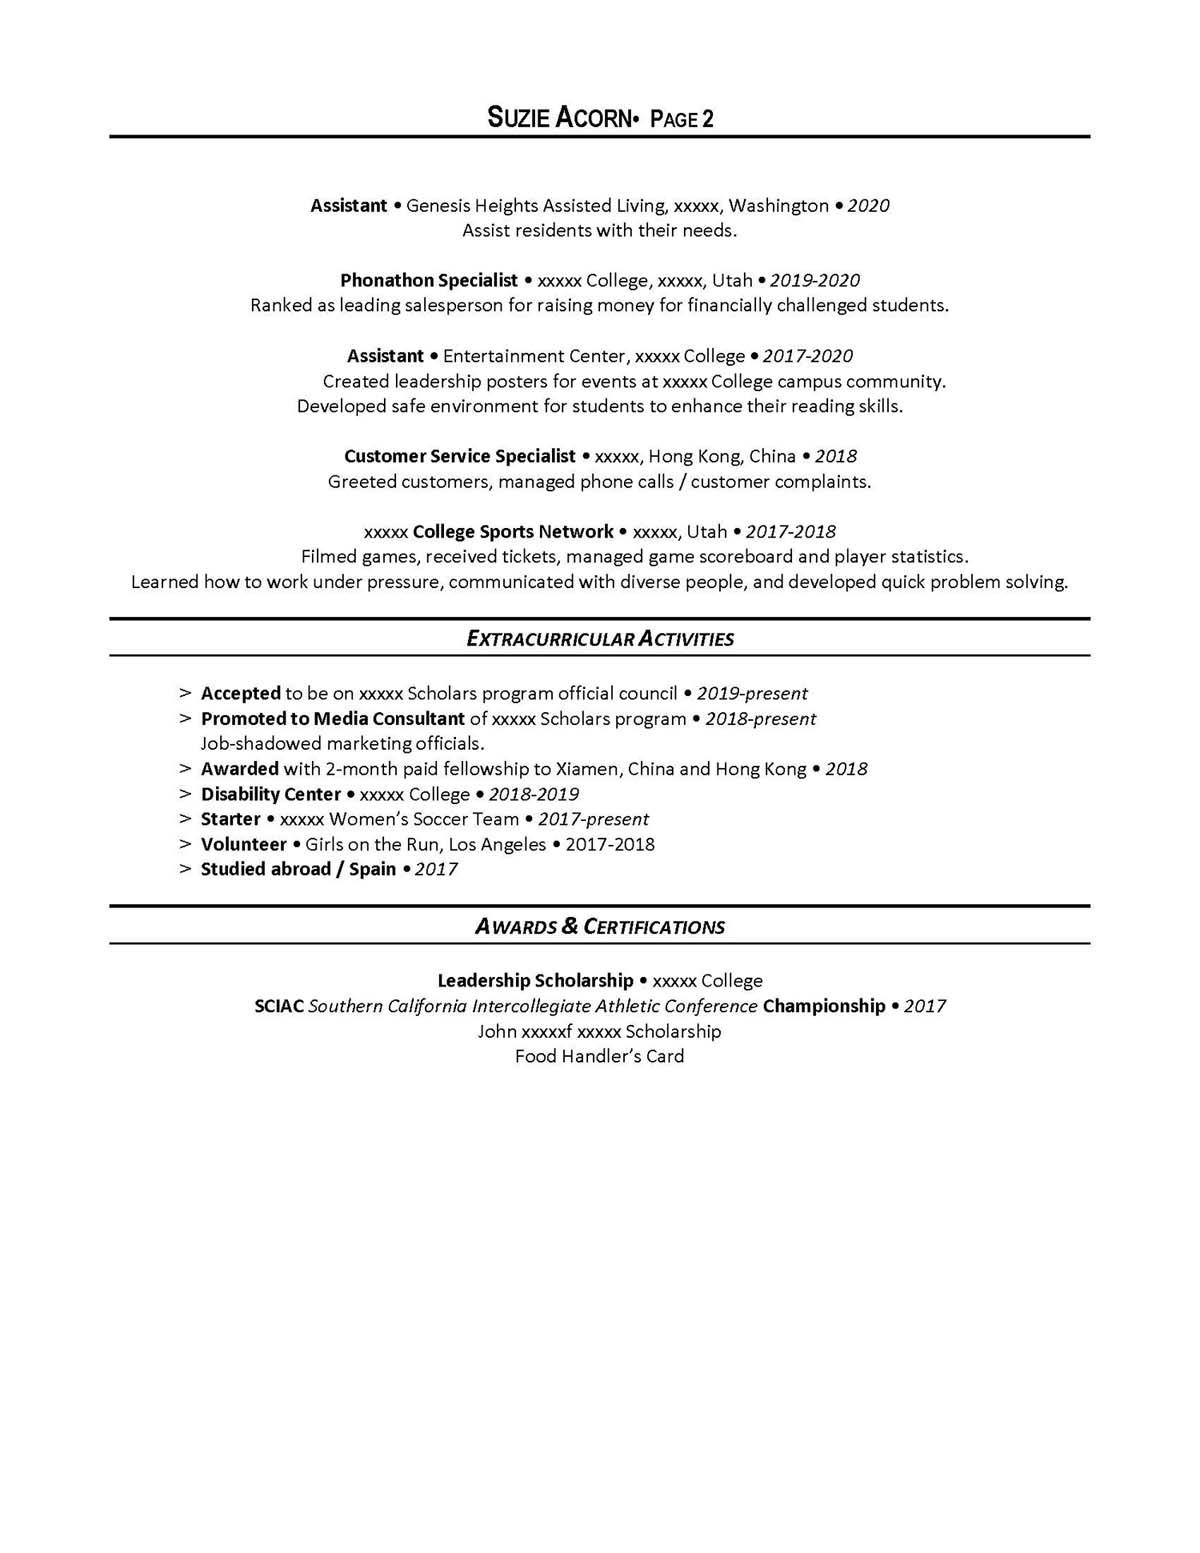 Sample resume: Sales, Entry Level, Functional